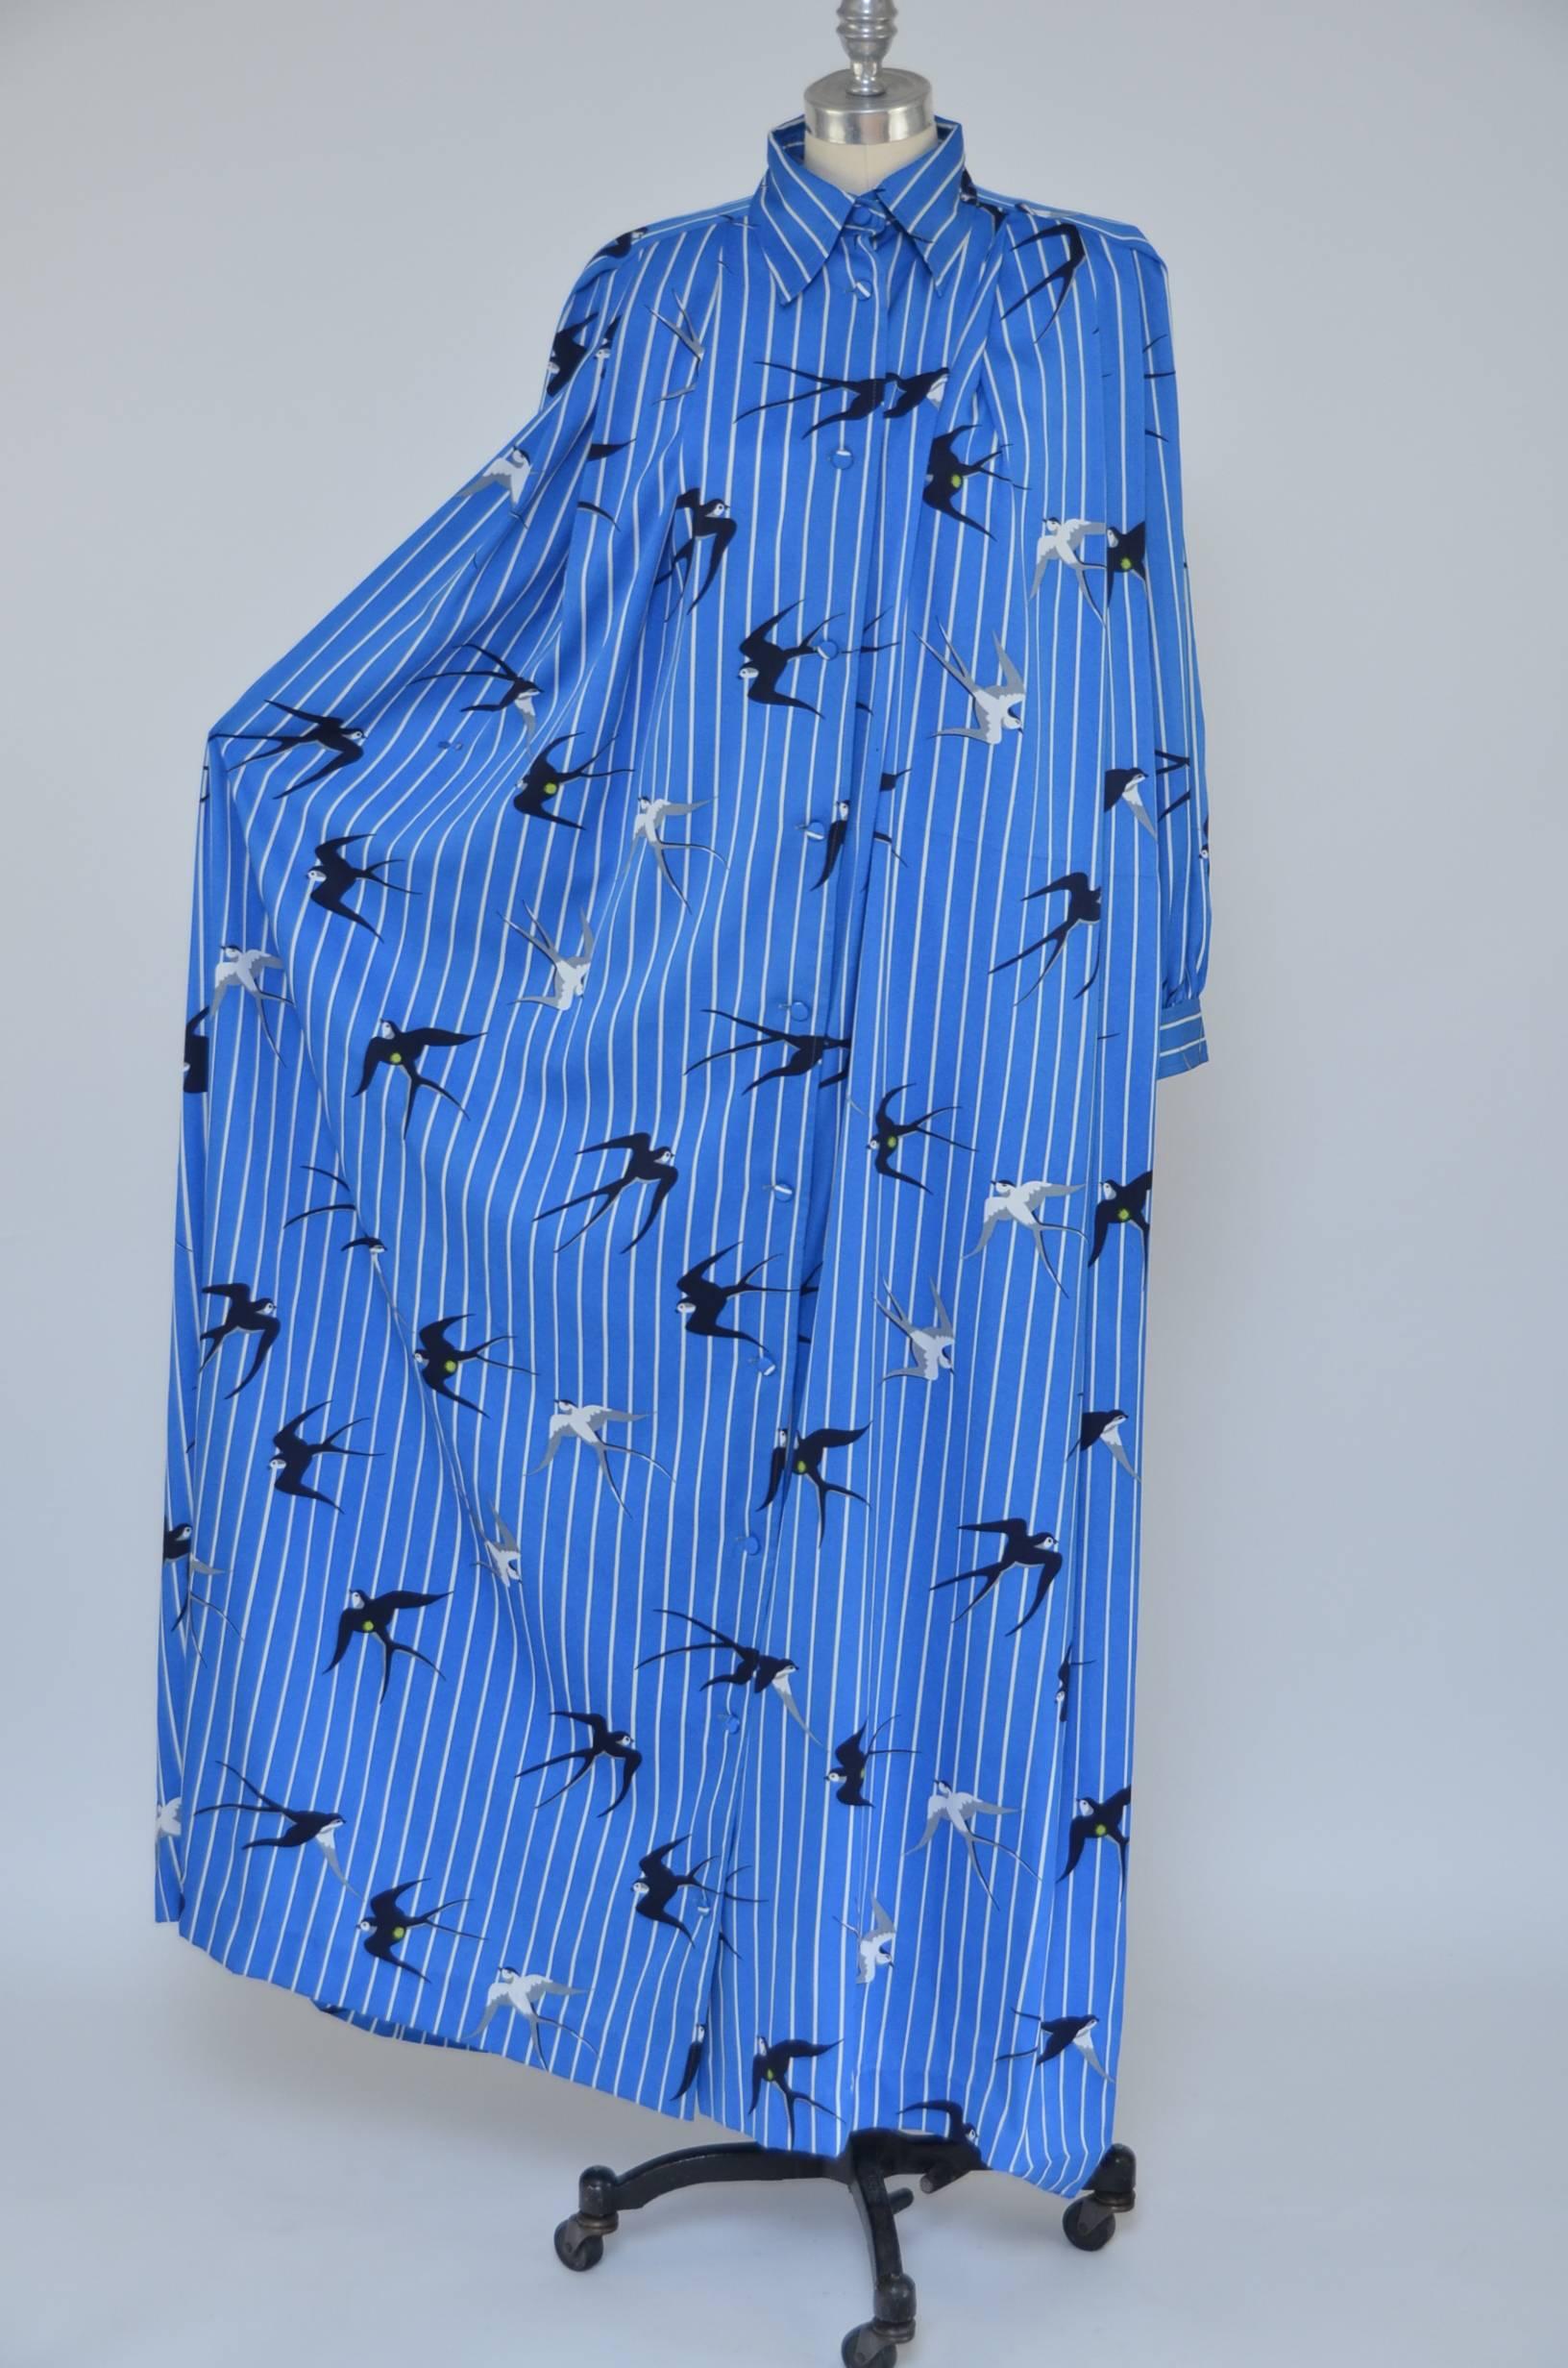 Issey Miyake 1970's birds dress.
Excellent condition with 2 tiny hole's on the fabric as photographed.
Print is so 